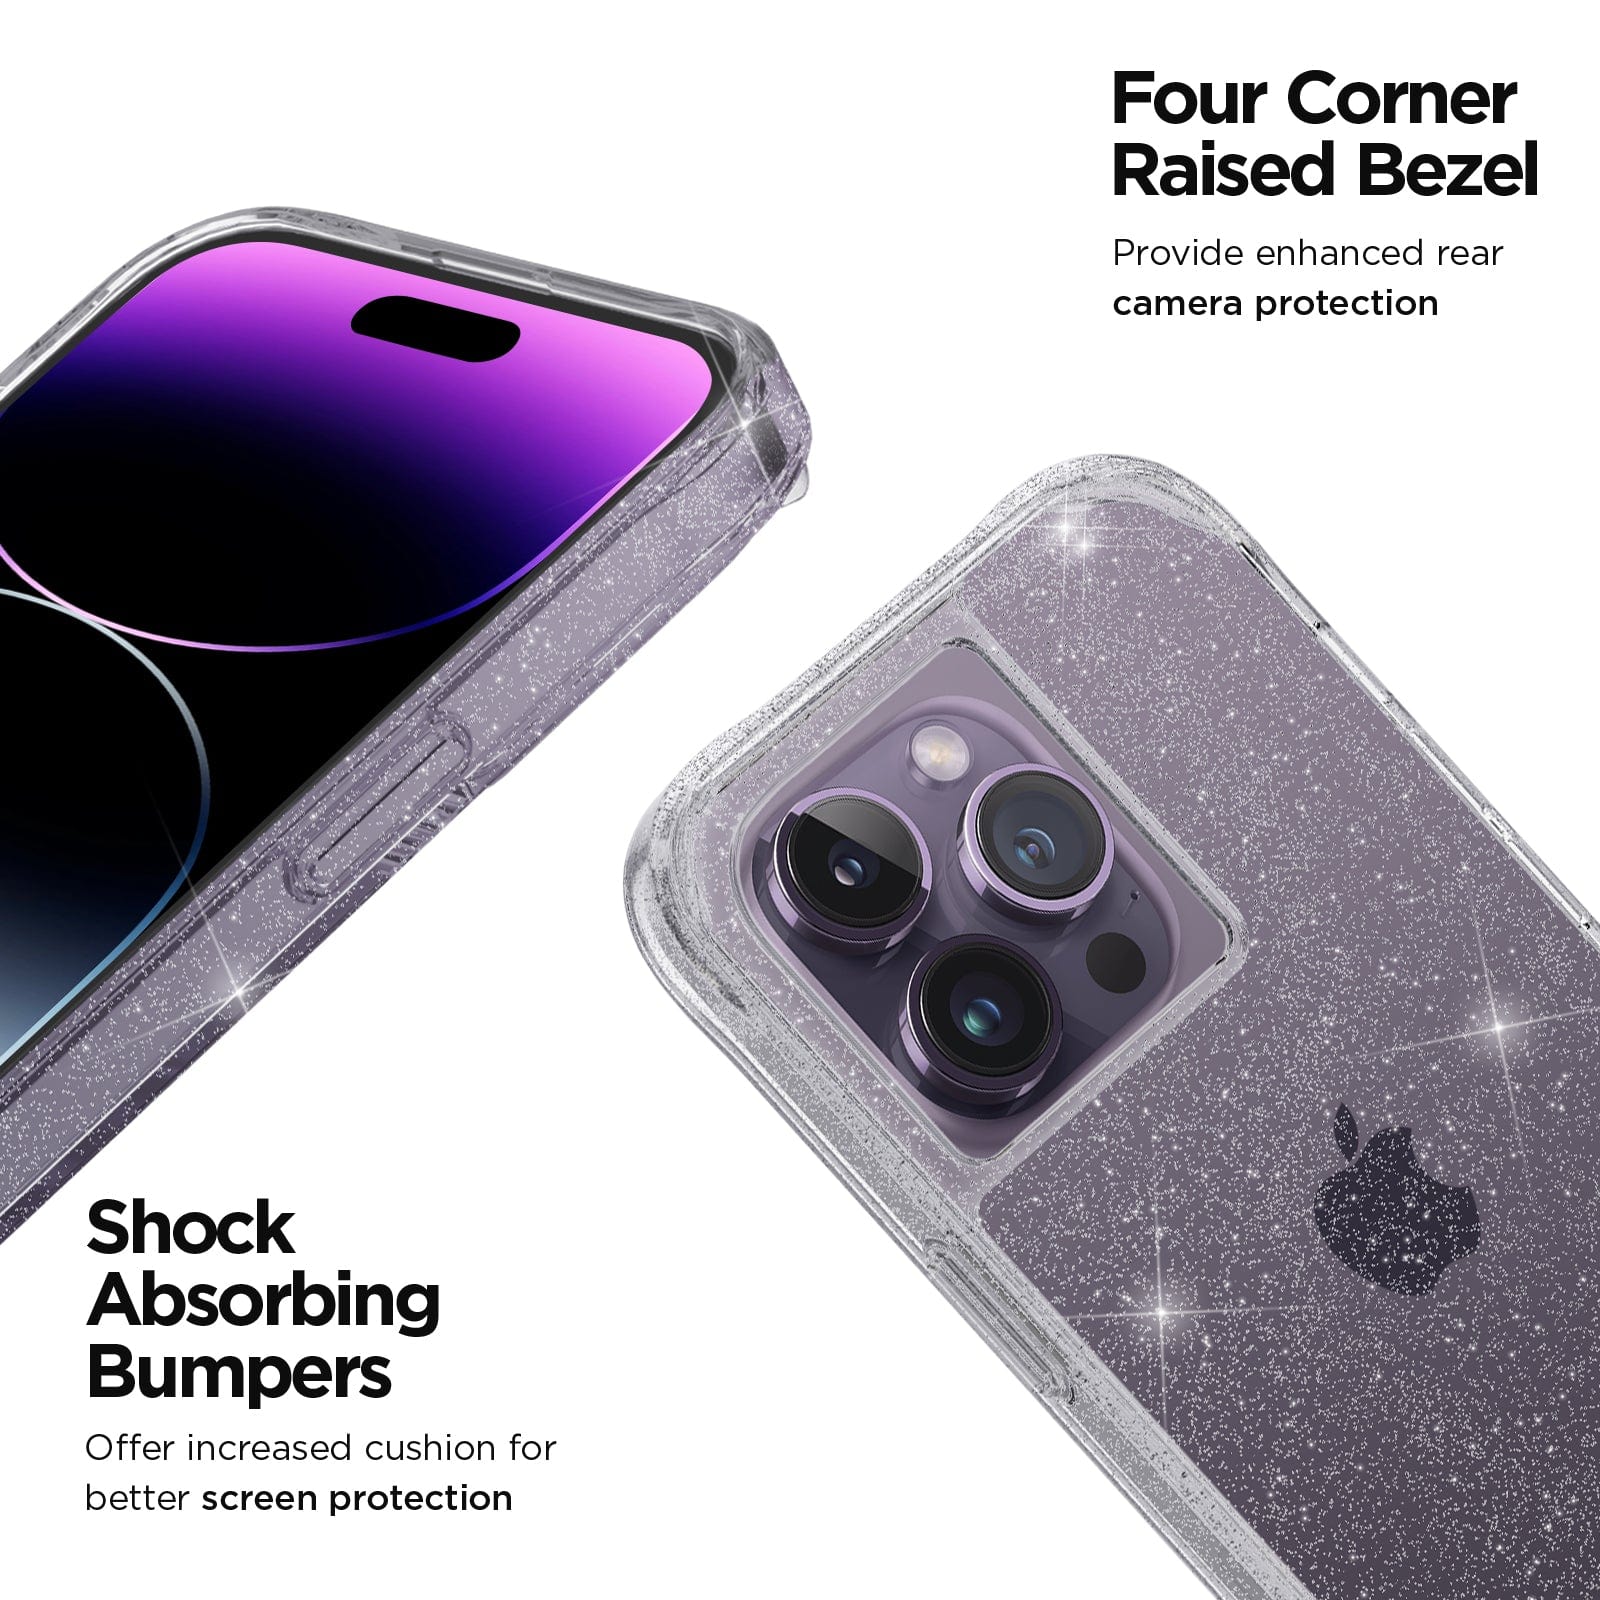 FOUR CORNER RAISED BEZEL PROVIDE ENHANCED REAR CAMERA PROTECTION. SHOCK ABSORBING BUMPES OFFER INCREASED CUSHION FOR BETTER SCREEN PROTECTION. 